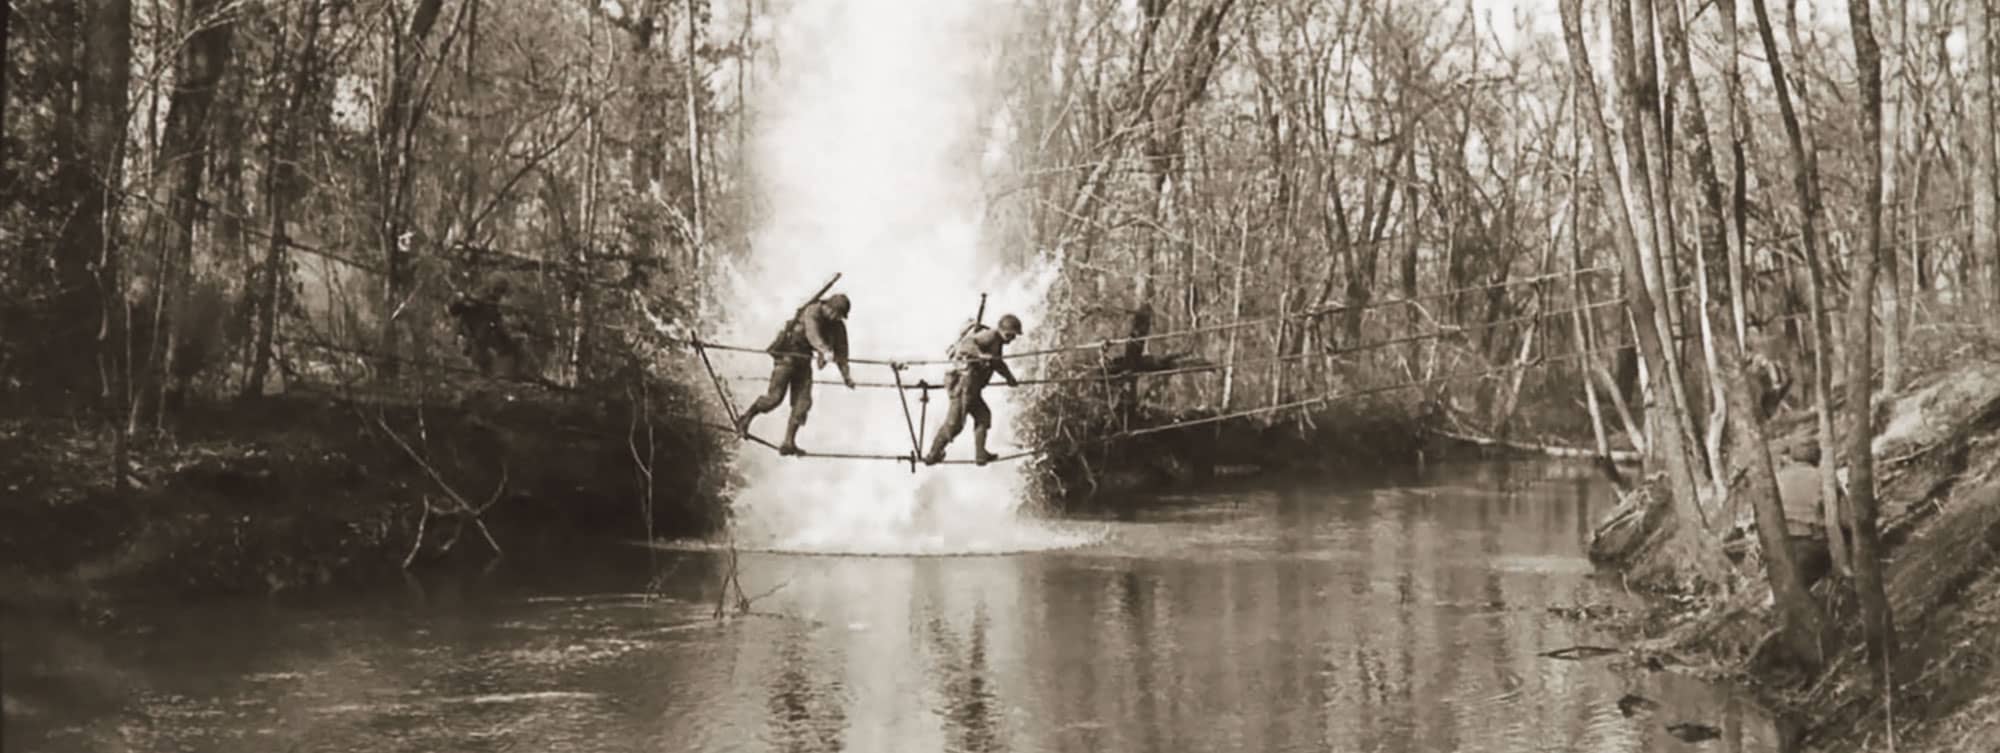 Second Army Rangers cross a stream on a toggle-rope bridge under simulated battle conditions. This demostration occured at Camp Forrest, Tennessee, on 23 January 1943.